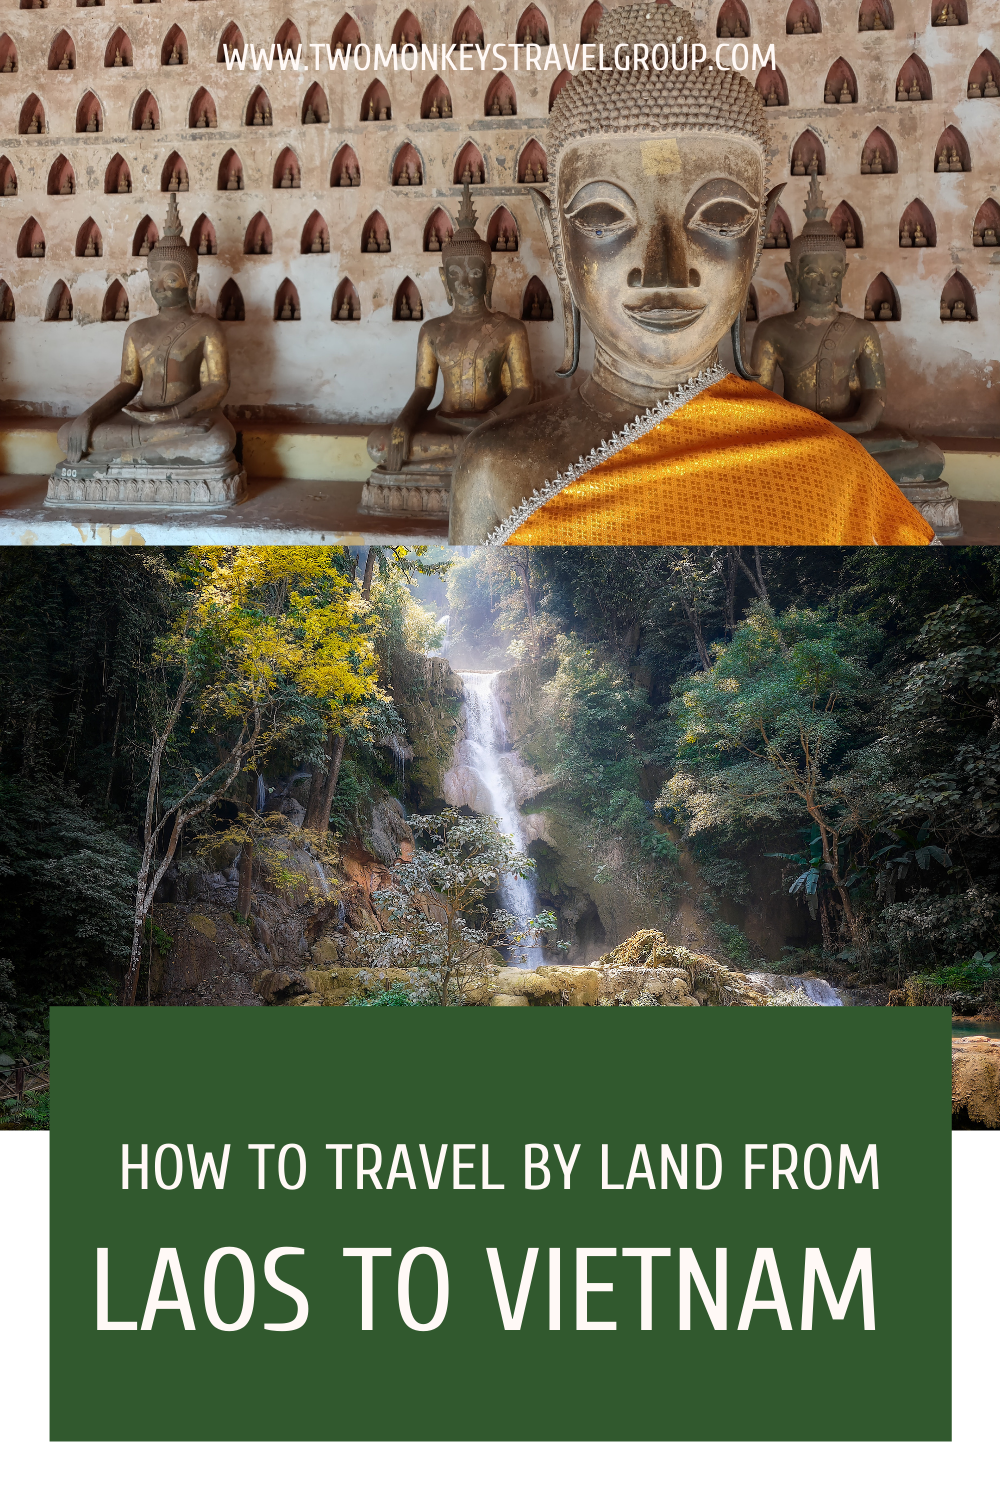 How to Travel by Land from Laos to Vietnam (A Backpacker’s Guide)